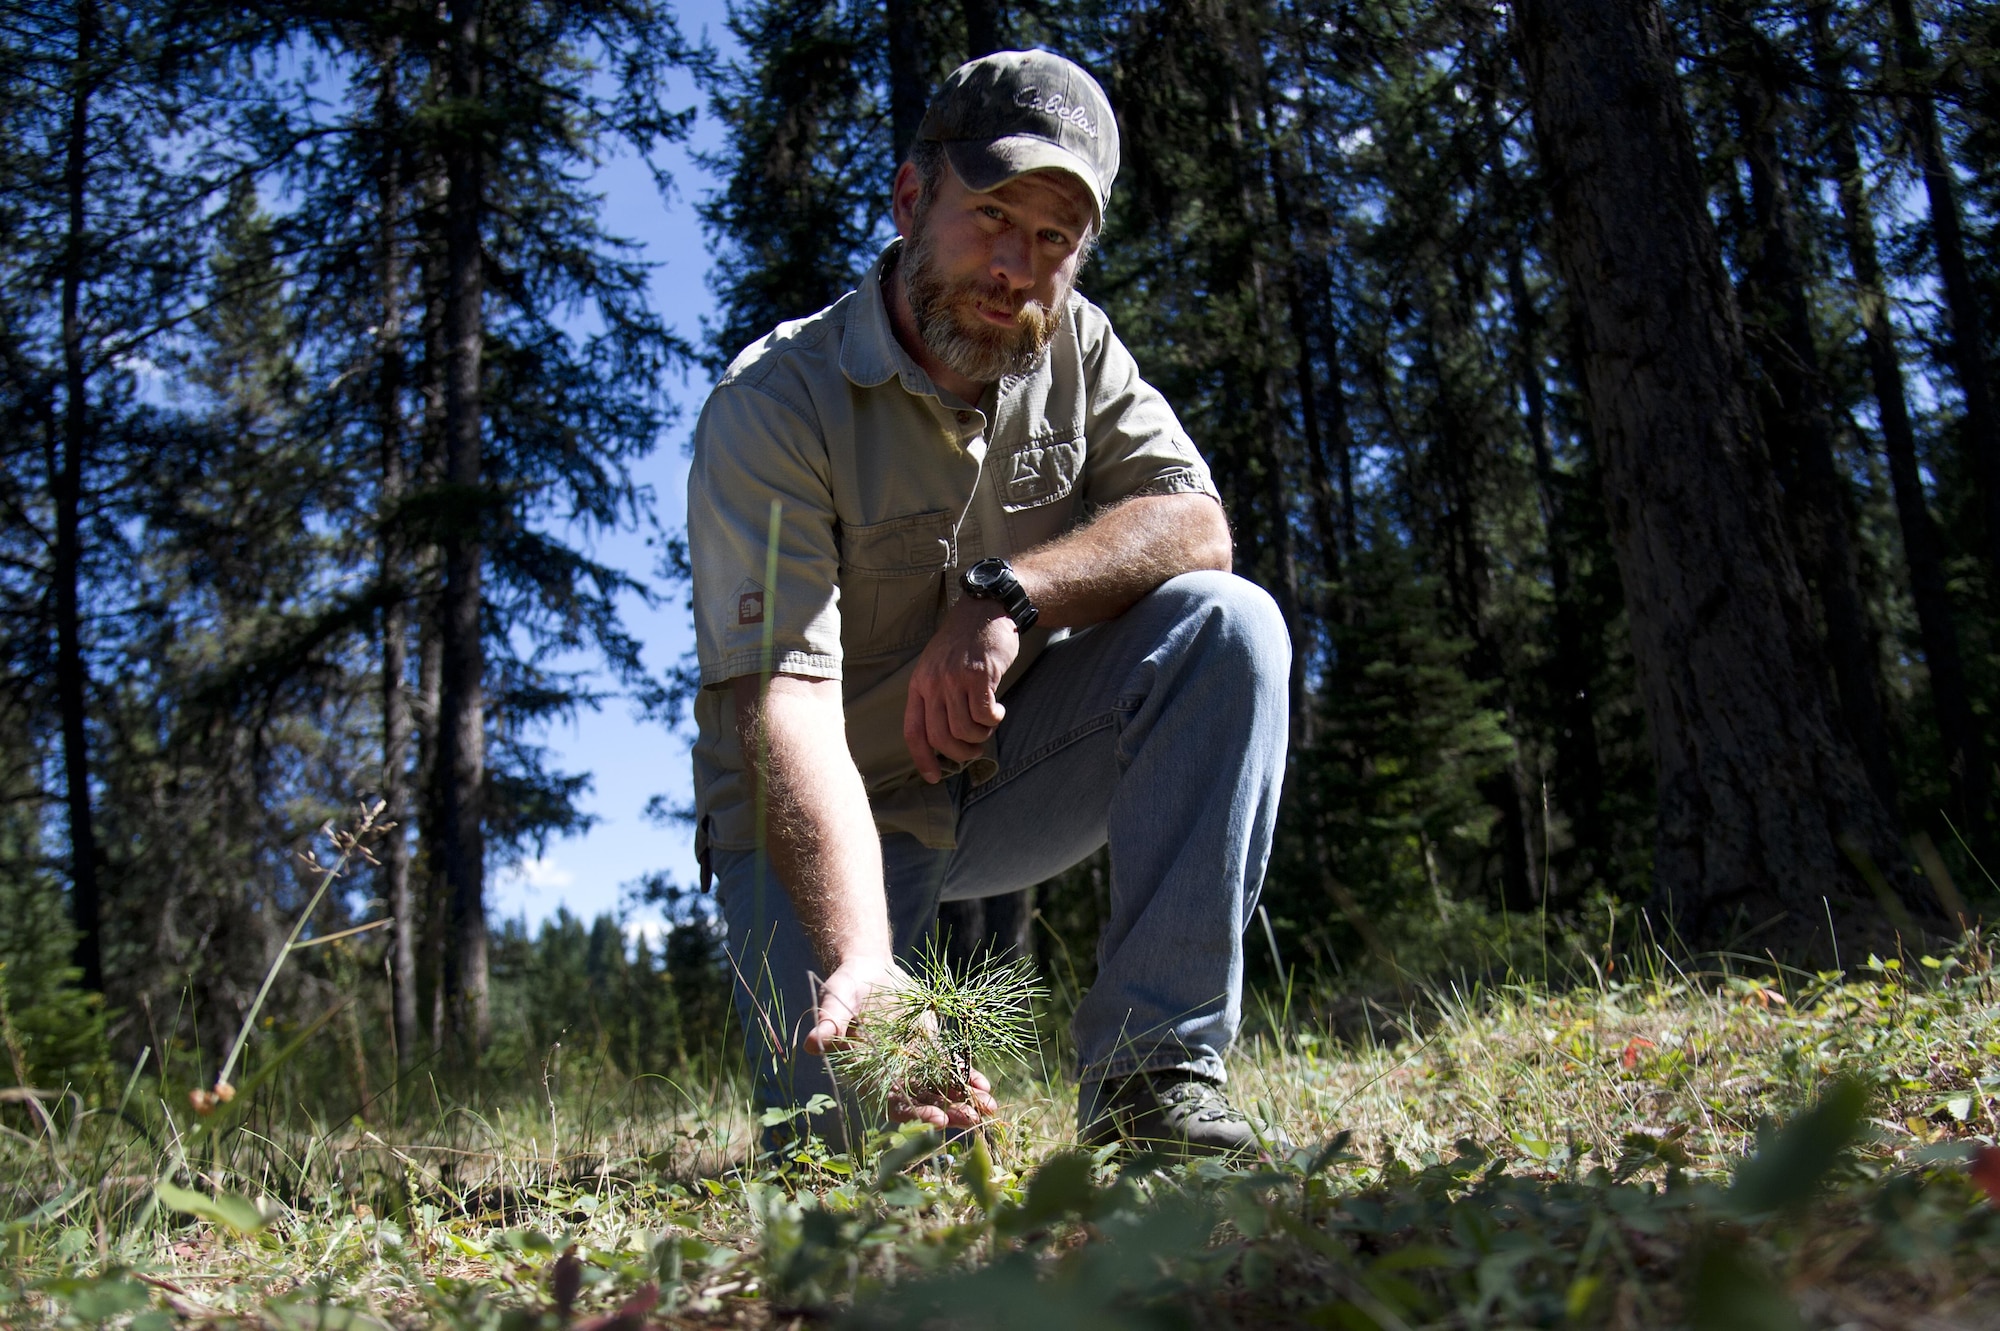 Todd Foster, the 336th Training Group training area manager, poses with a sapling July 29, 2015, at Colville National Forest, Wash. With efforts from Foster and Rick Hall, an Air Force liaison to the U.S. Forest Service, between 500 and 1,200 trees per area, have been planted in U.S. Air Force Survival School training areas giving nature a jumpstart by 10 to 15 years. (U.S. Air Force photo/Airman 1st Class Nicolo J. Daniello)